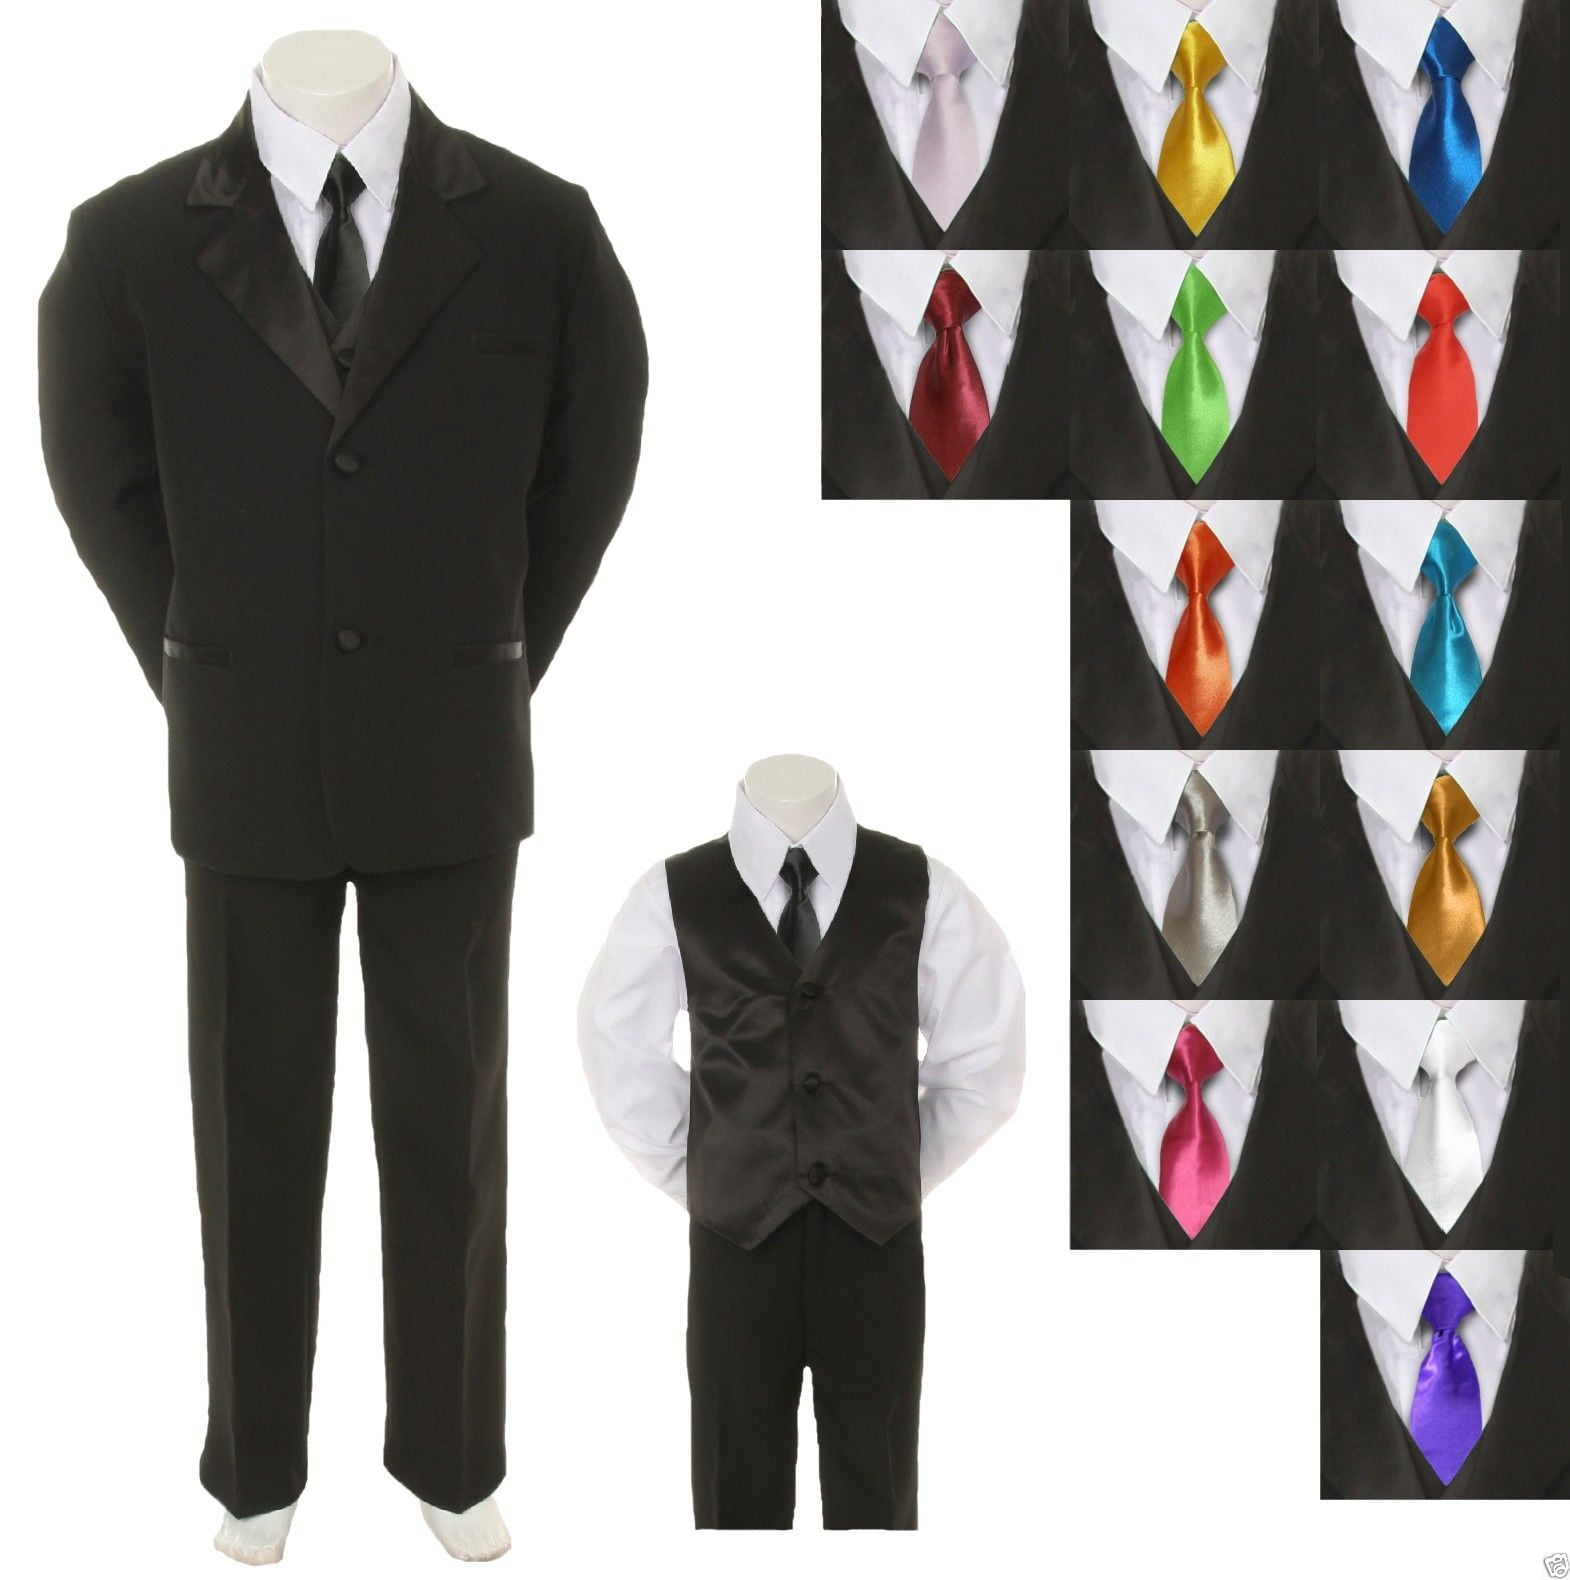 6pc Baby Toddler Boy Teen Formal Black Suit Set Or 1pc Satin Bow tie Only Sm-20 